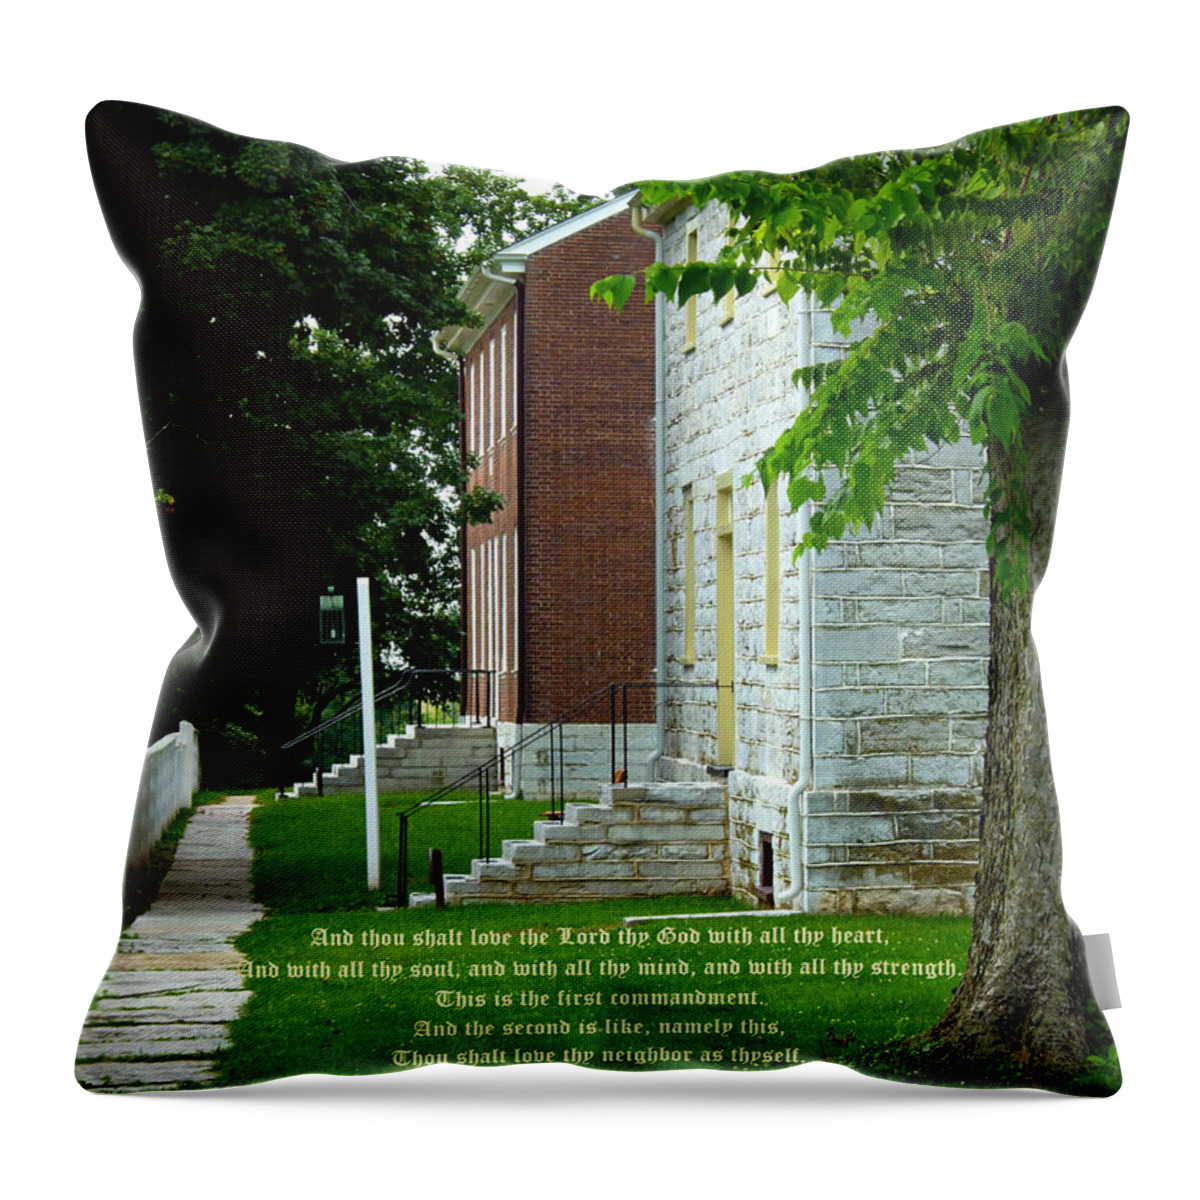 Shaker Village Throw Pillow featuring the photograph Country Urban with Mark 12vs30to31 by Mike McBrayer